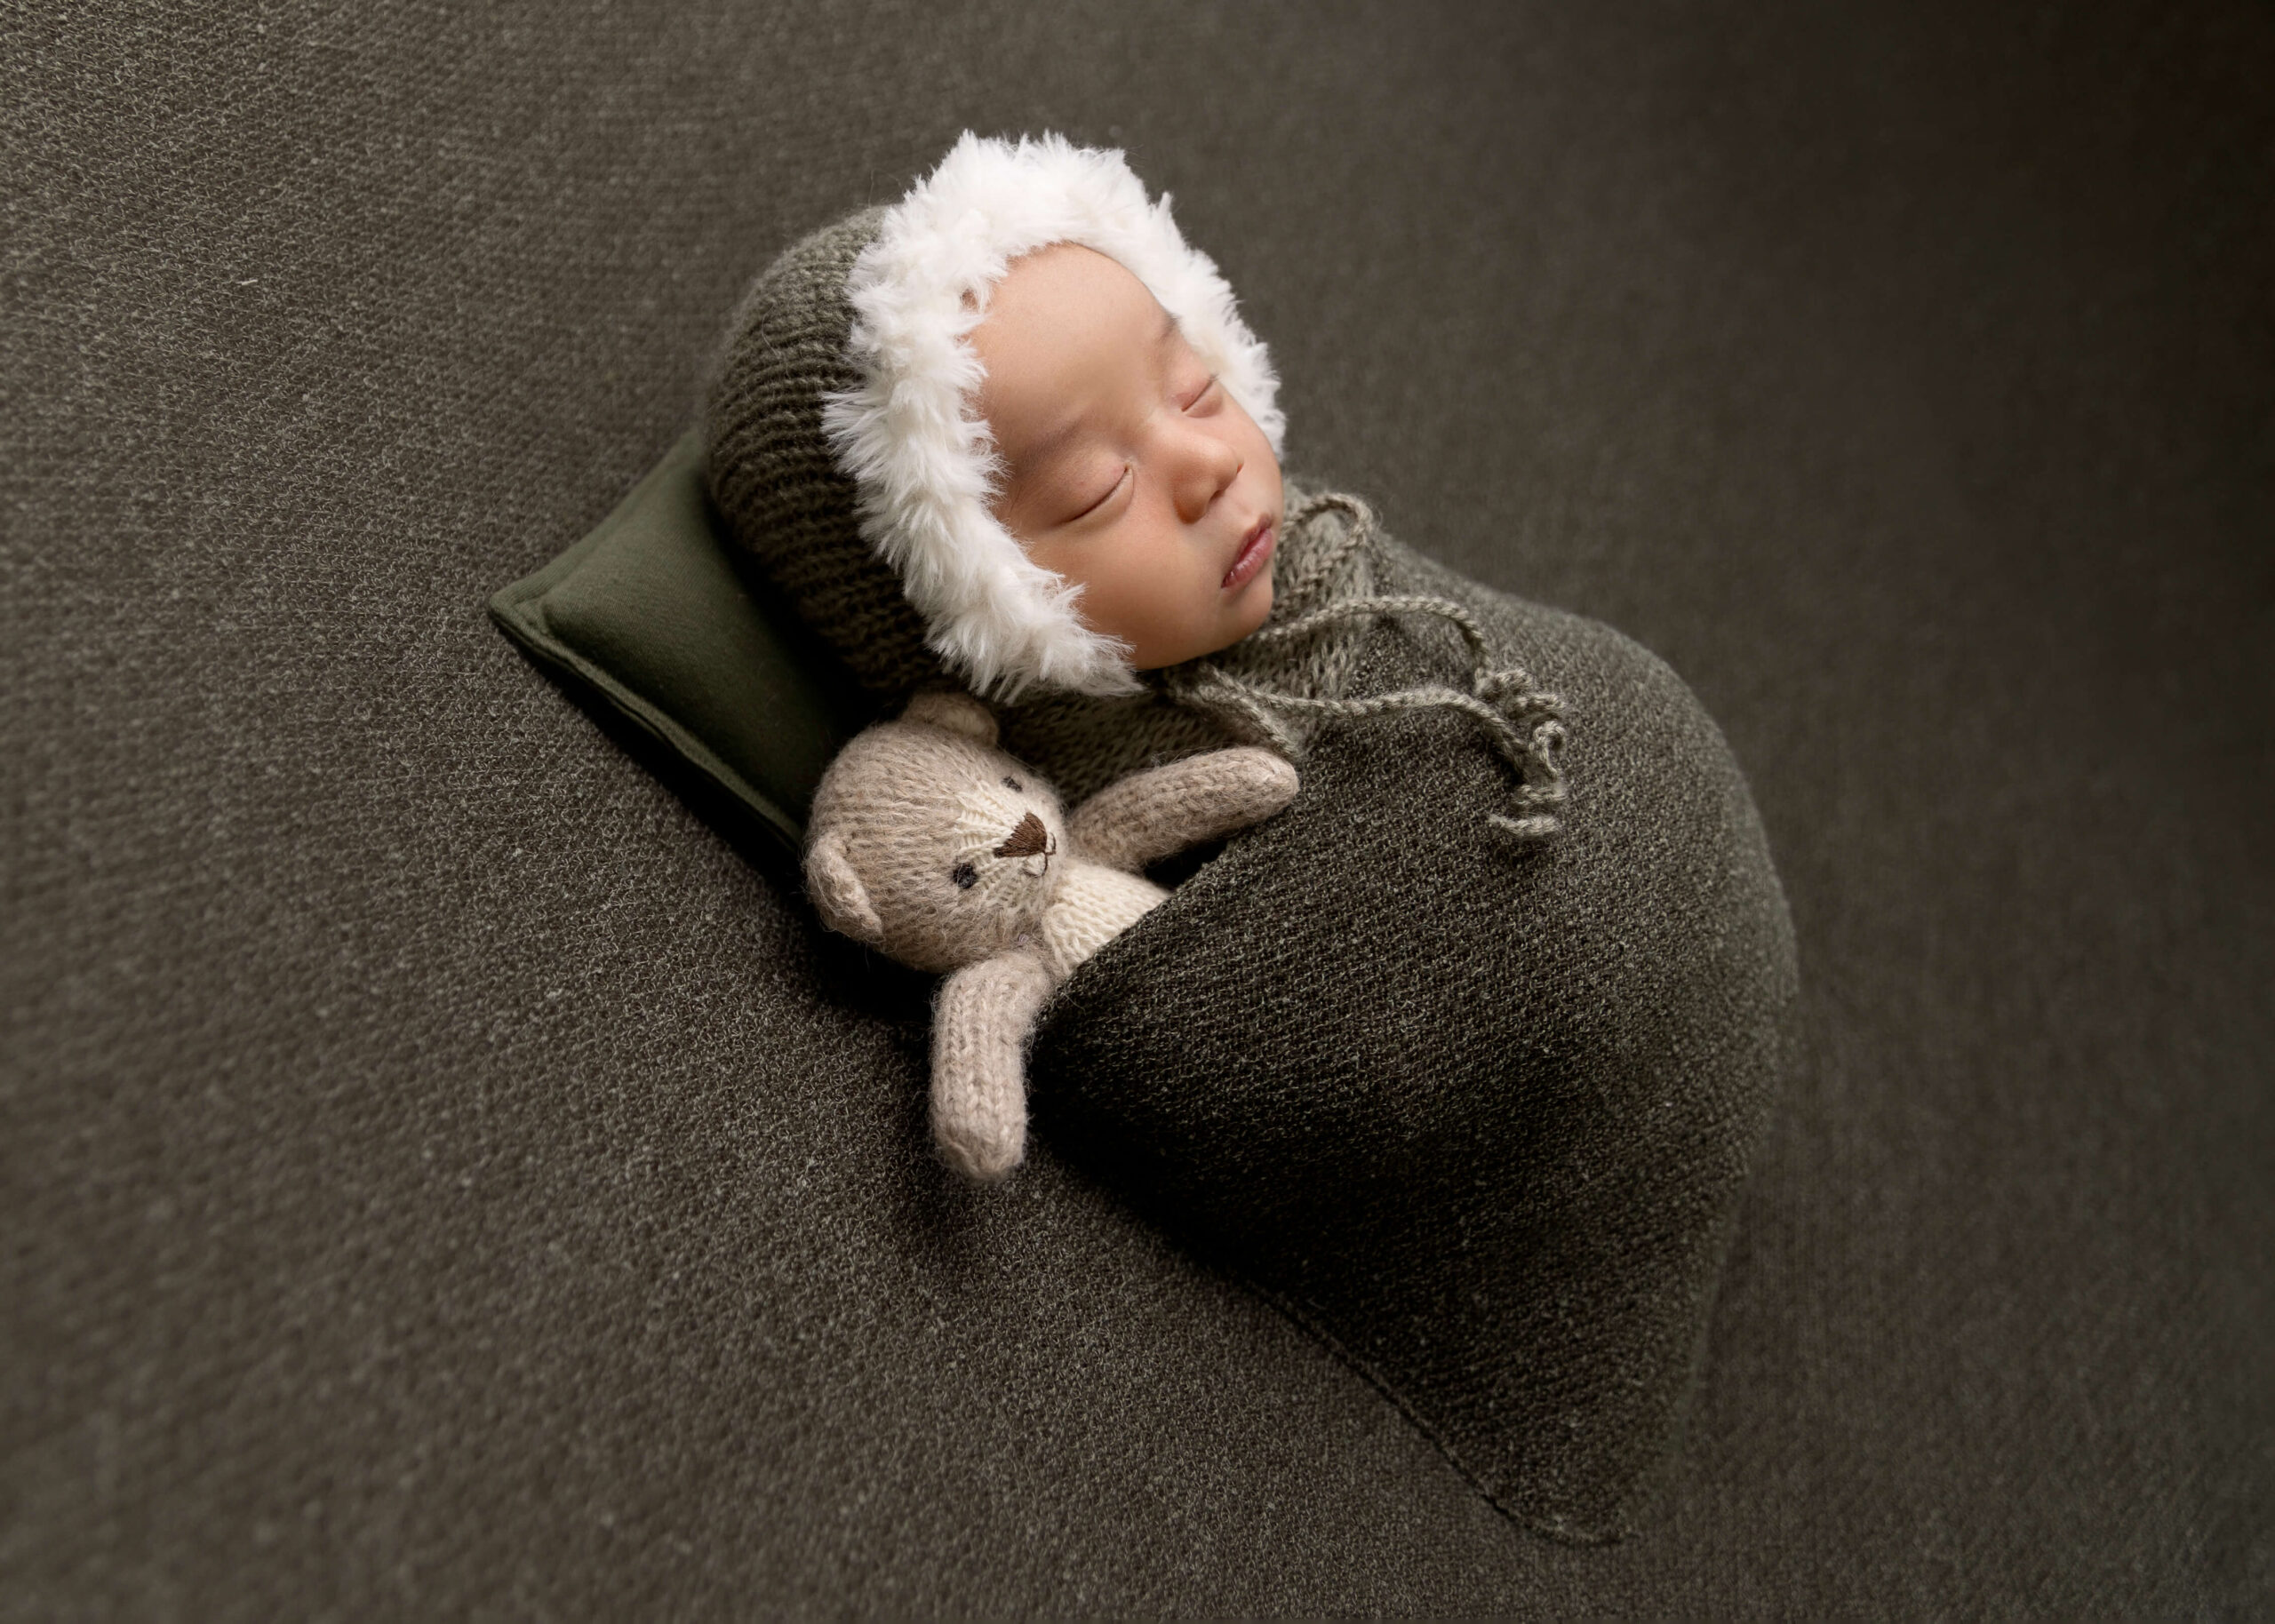 Baby posed sleeping in a pocket with a teddy bear in studio by Ashley Nicole Photography.